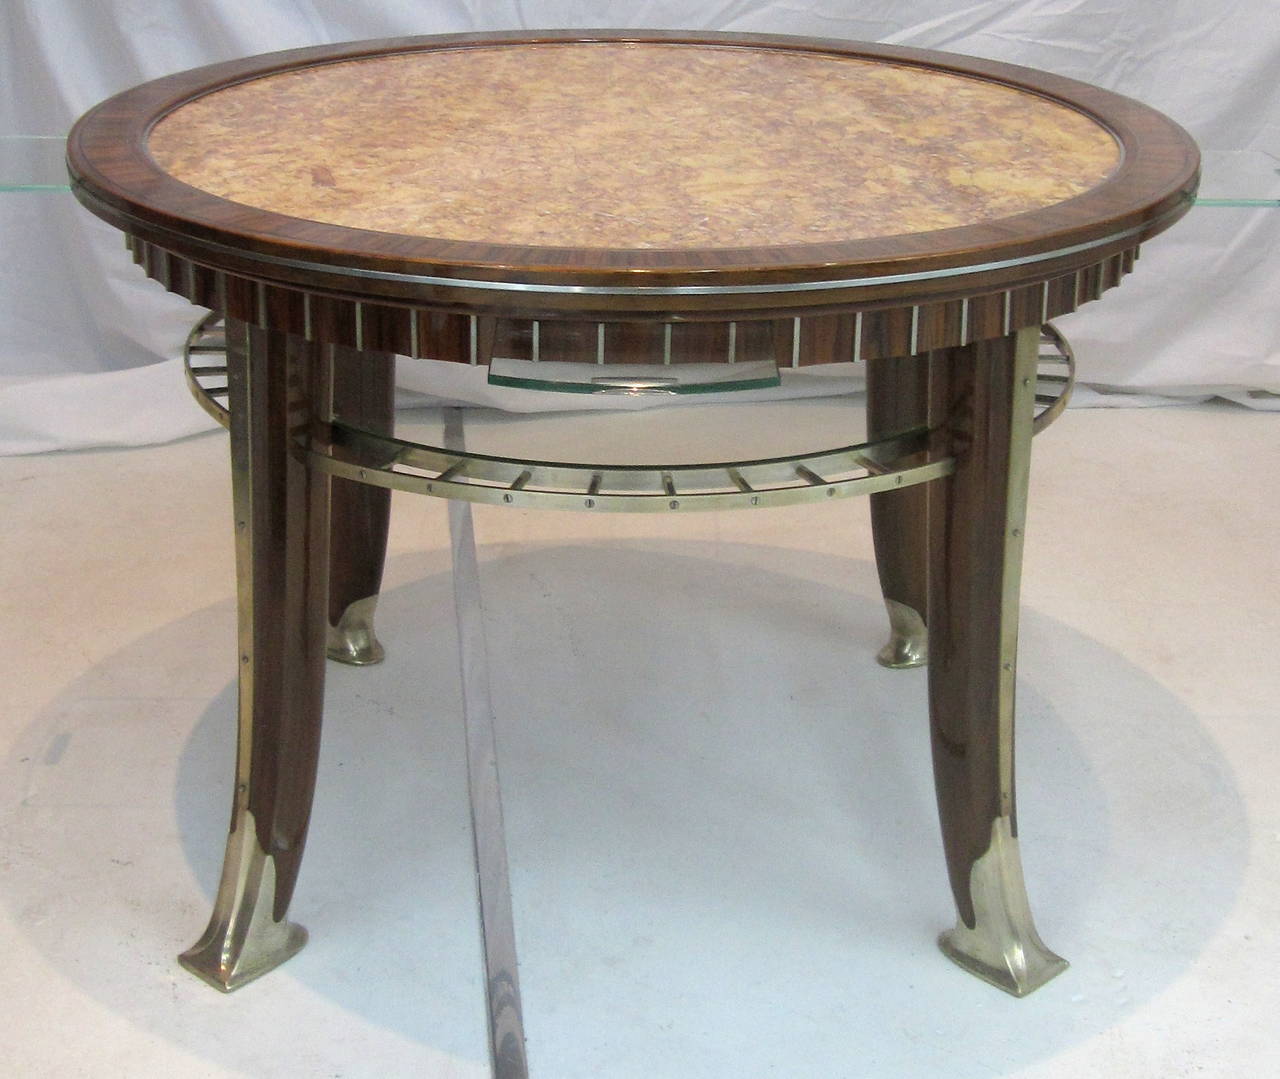 Modernist French Art Deco Cocktail Table by DJO Bourgeois In Good Condition For Sale In Miami, FL